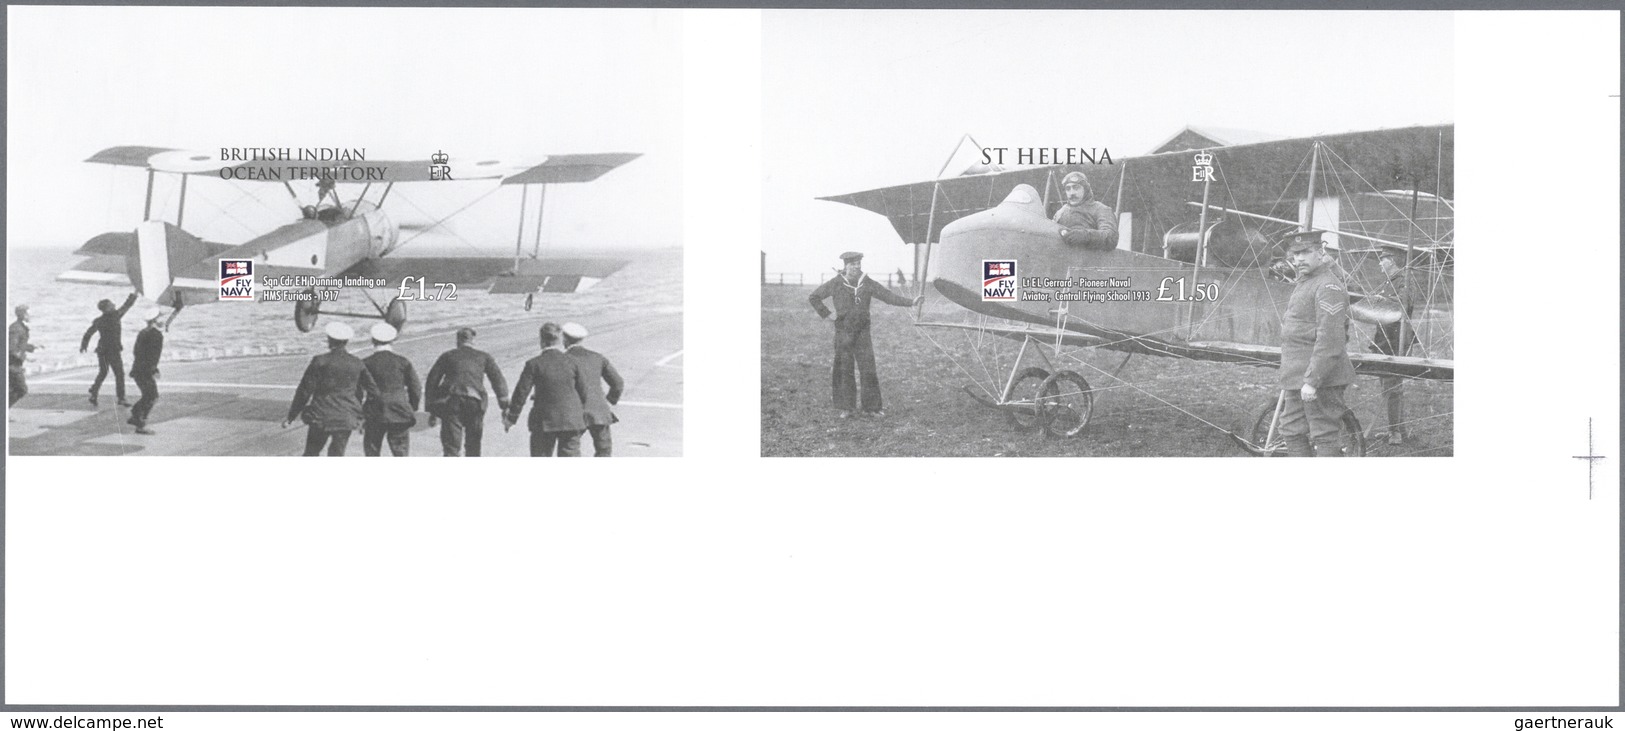 Thematik: Flugzeuge, Luftfahrt / Airoplanes, Aviation: 2009, ST. HELENA And B.I.O.T.: 100 Years Roya - Airplanes